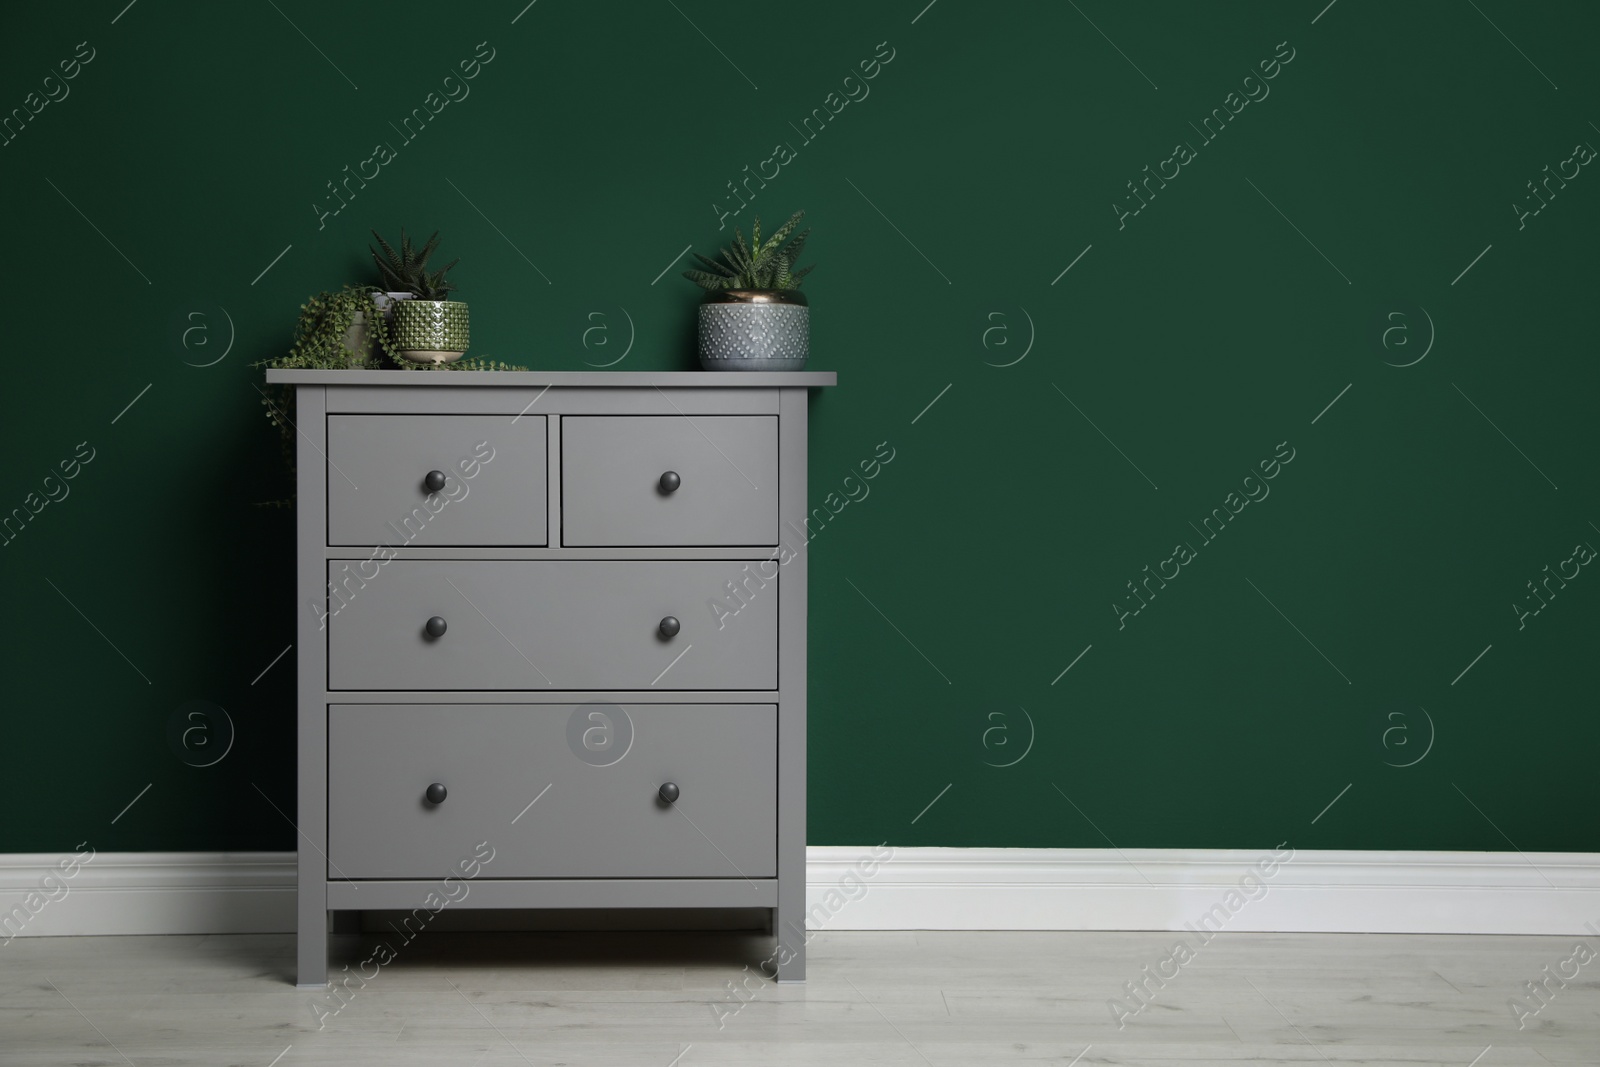 Photo of Modern chest of drawers with houseplants near green wall indoors. Space for text